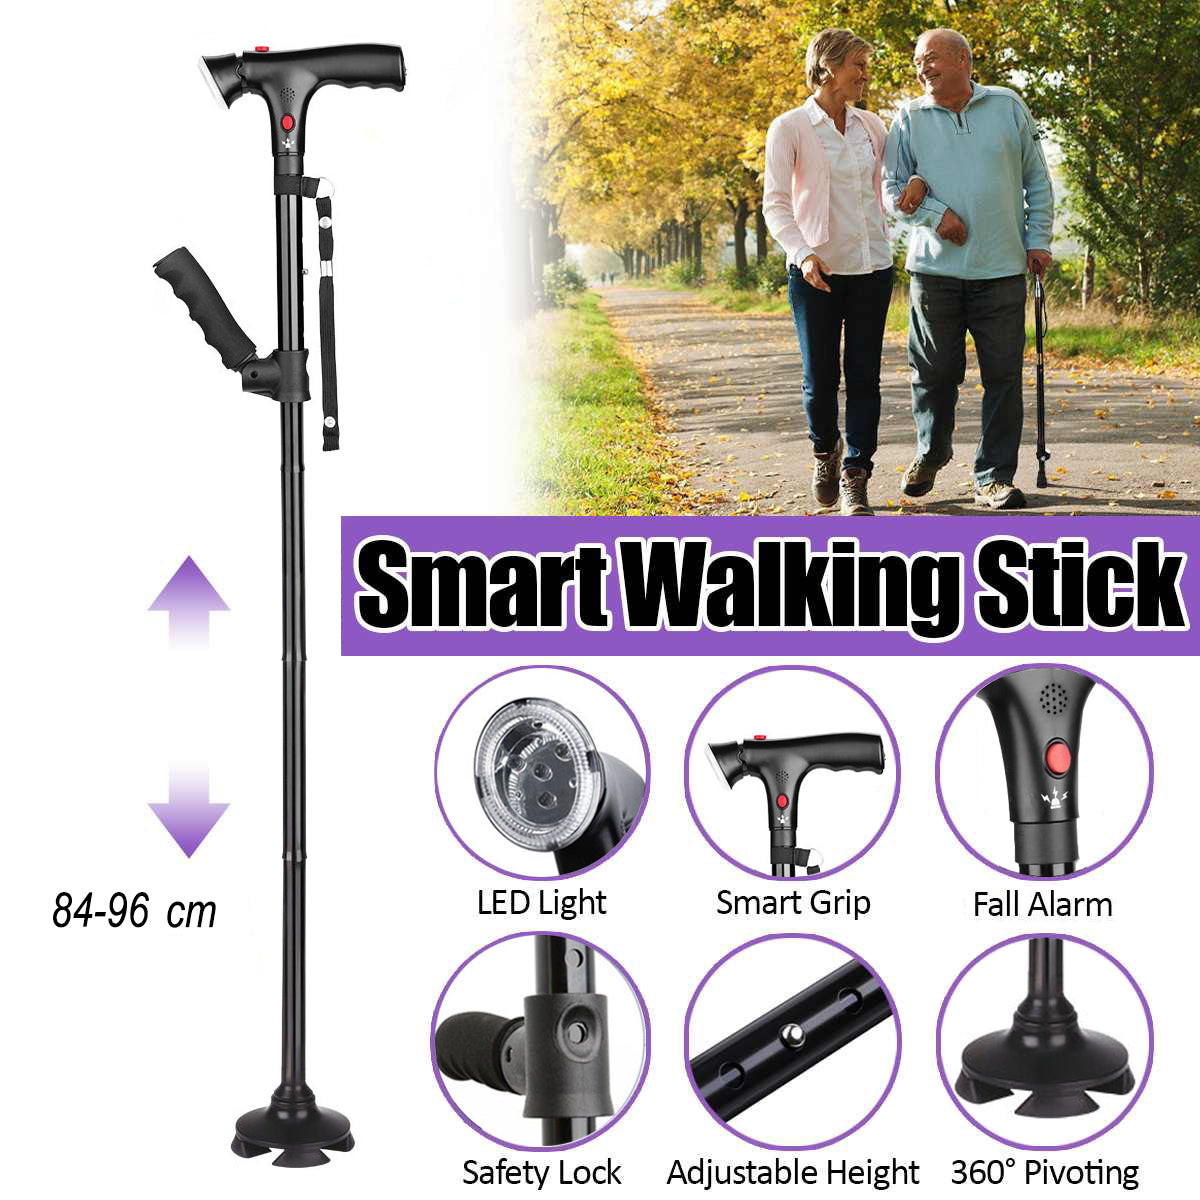 Vinmall Walking Canes for Men & Women, Folding Canes with LED Flashlight, Fall Alarm, Heavy Duty, Pivot Tip, Foldable Walking Sticks for Seniors & Adults Balance